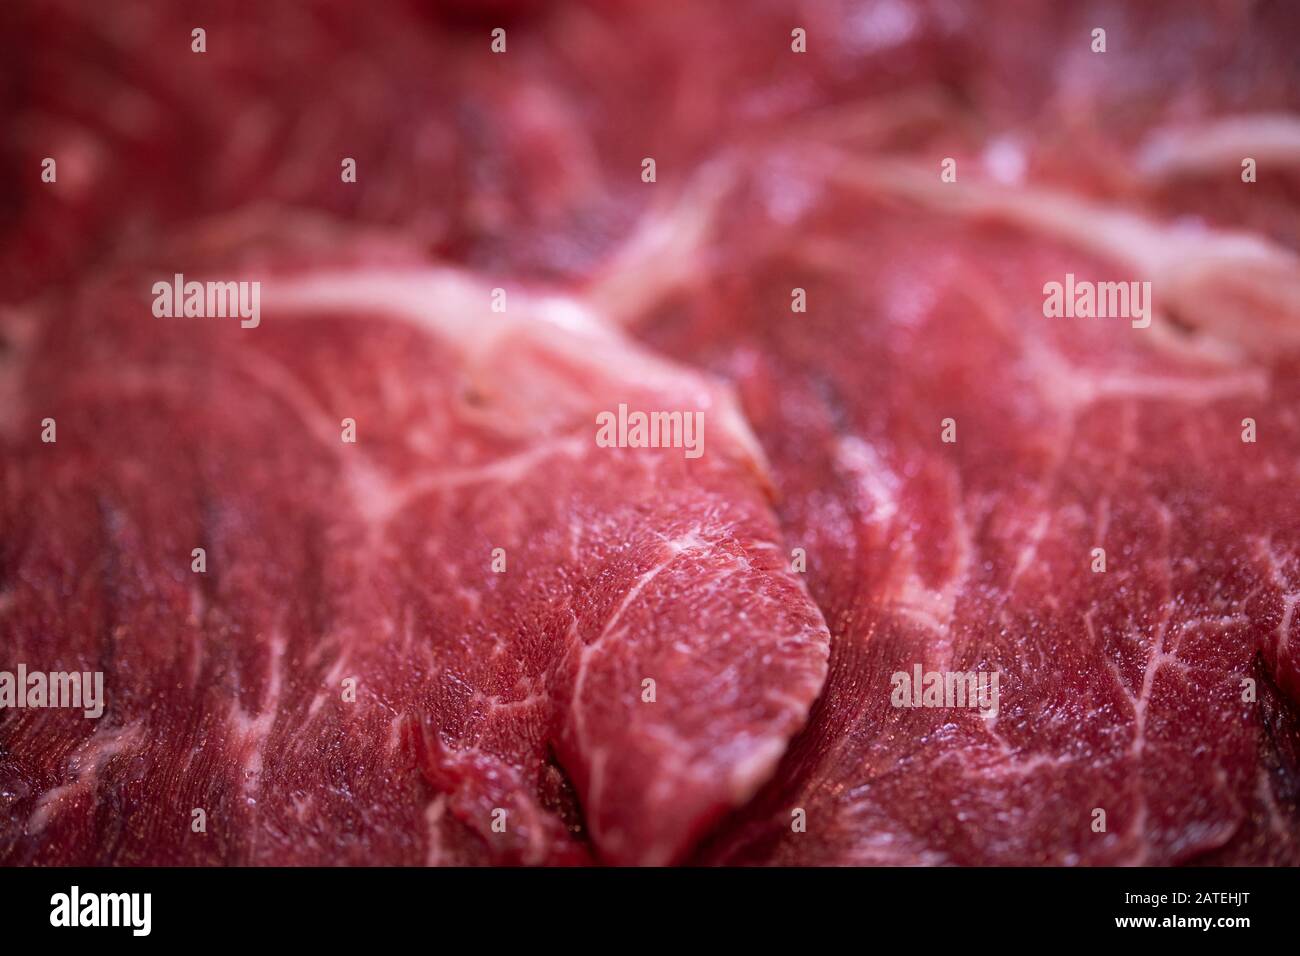 Raw beef meat slices on plate Stock Photo